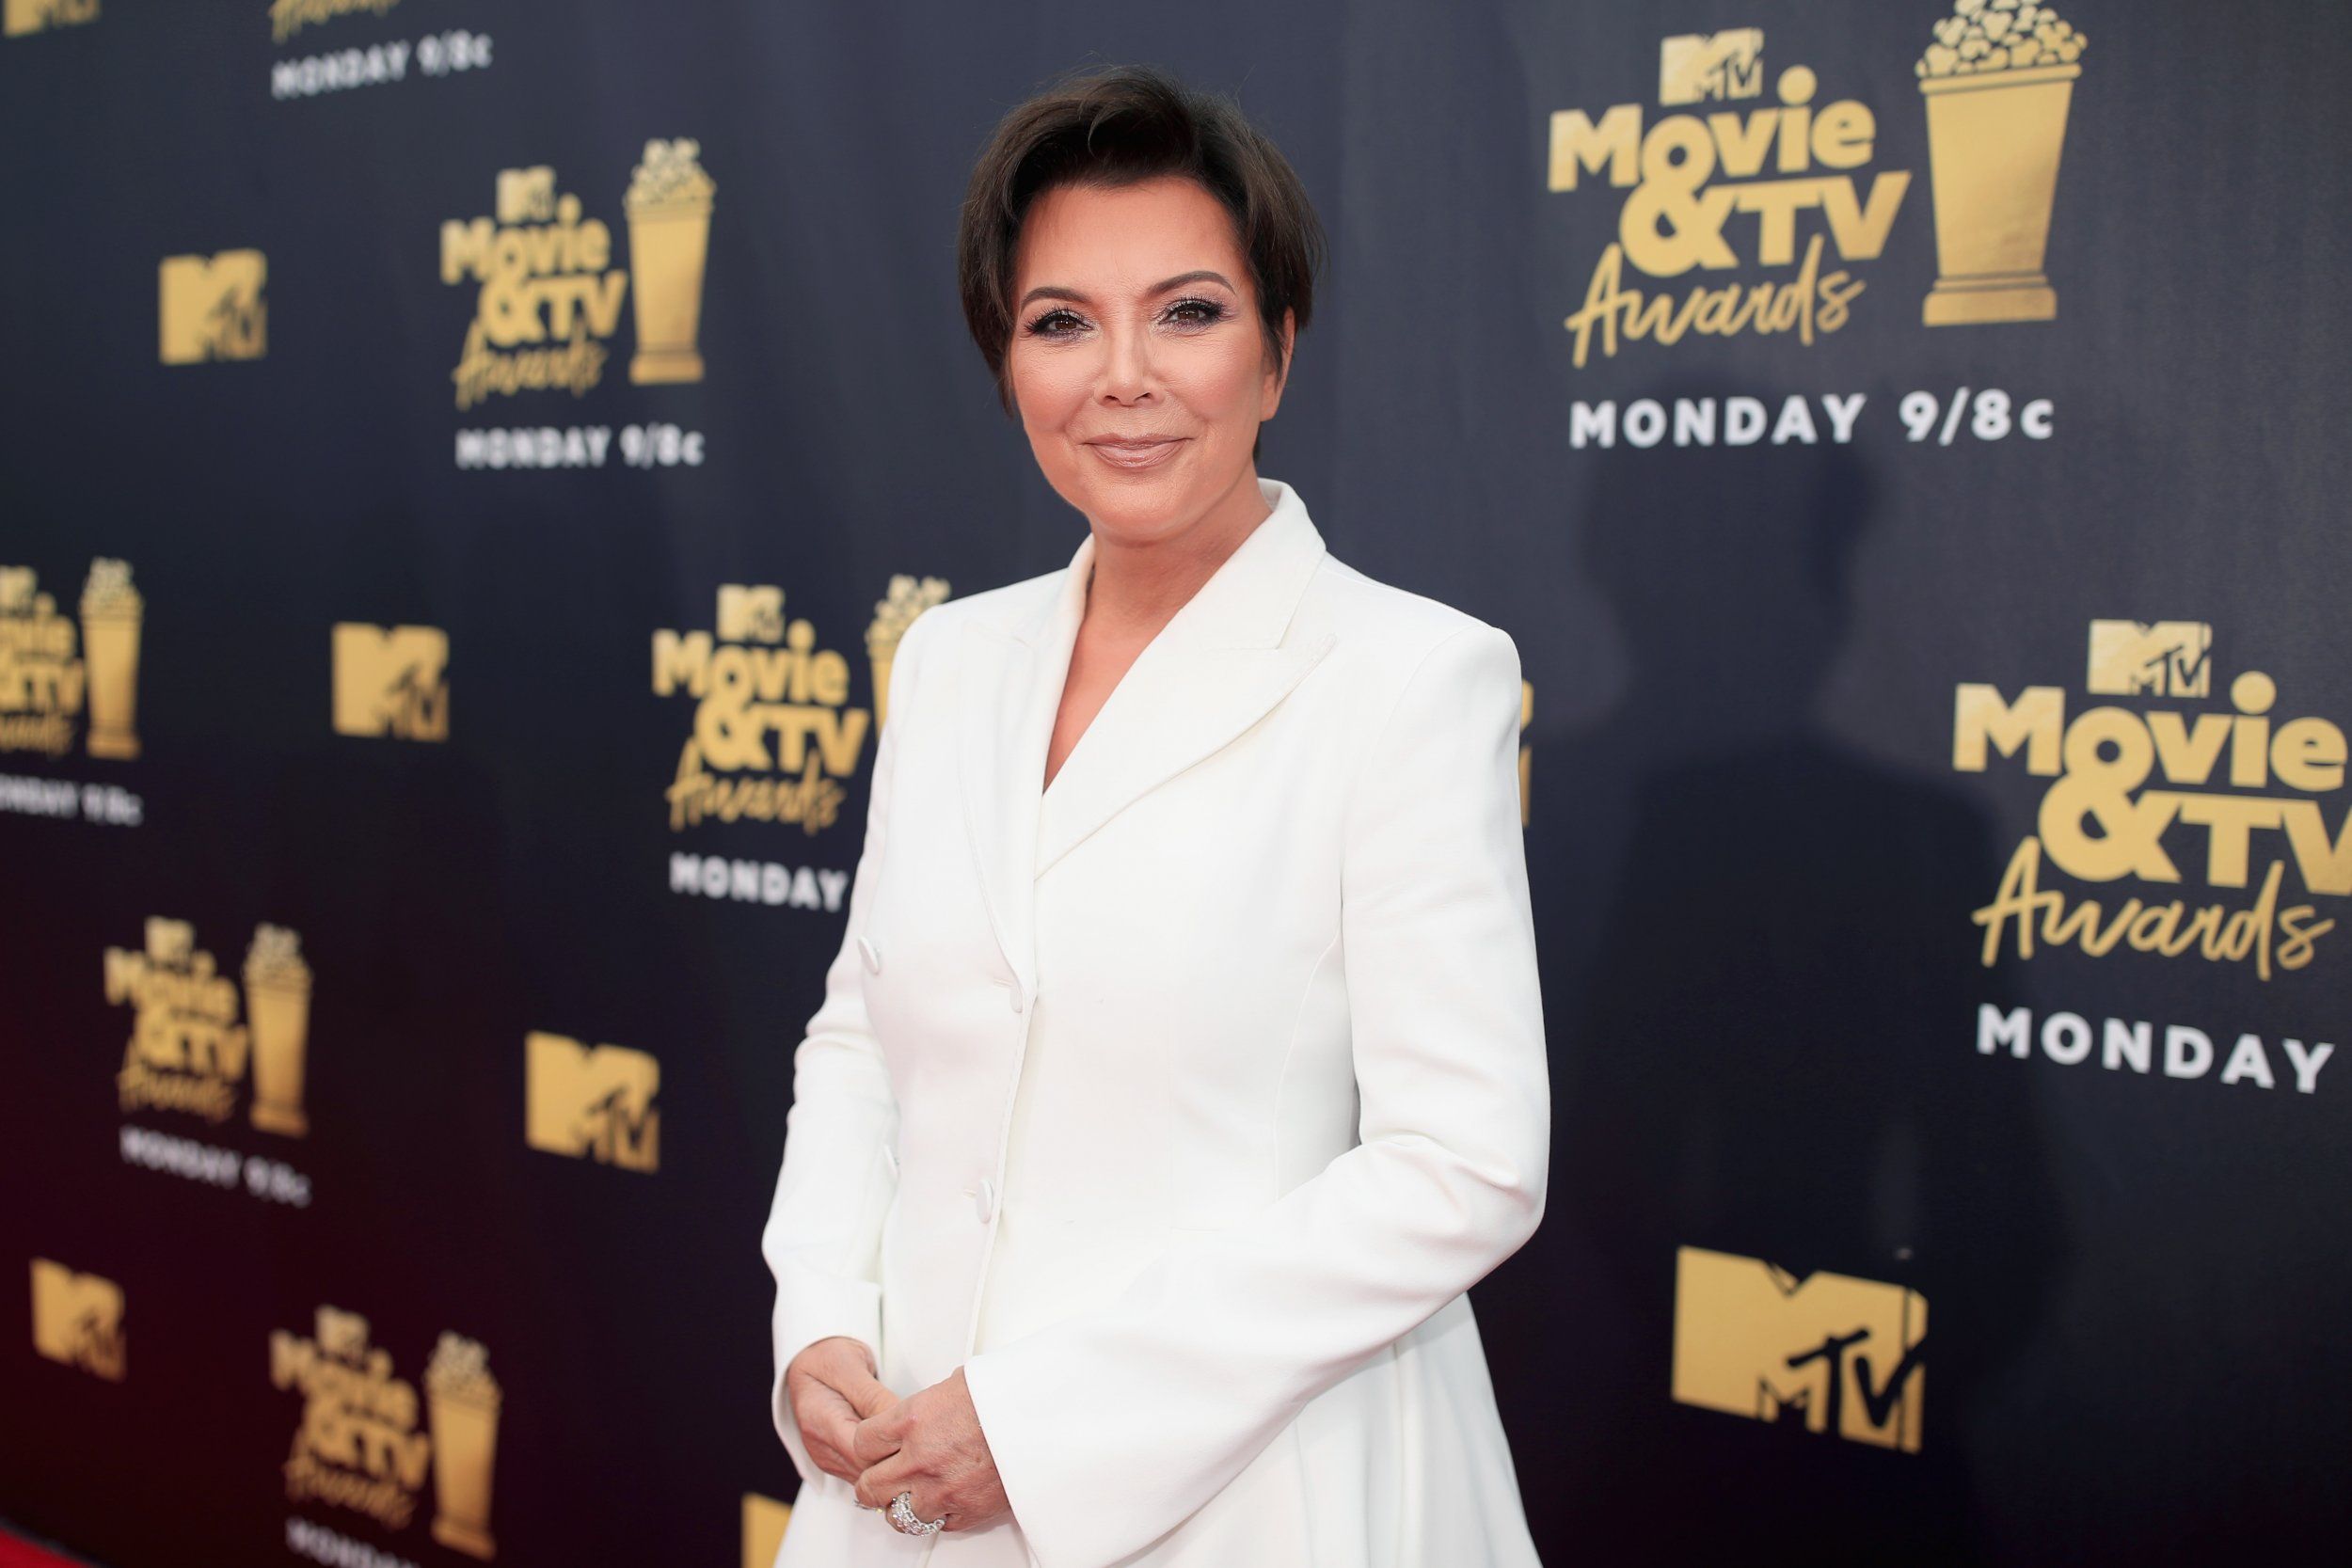 Kris Jenner Says Kanye West's White House Trip Was 'Very Spontaneous'